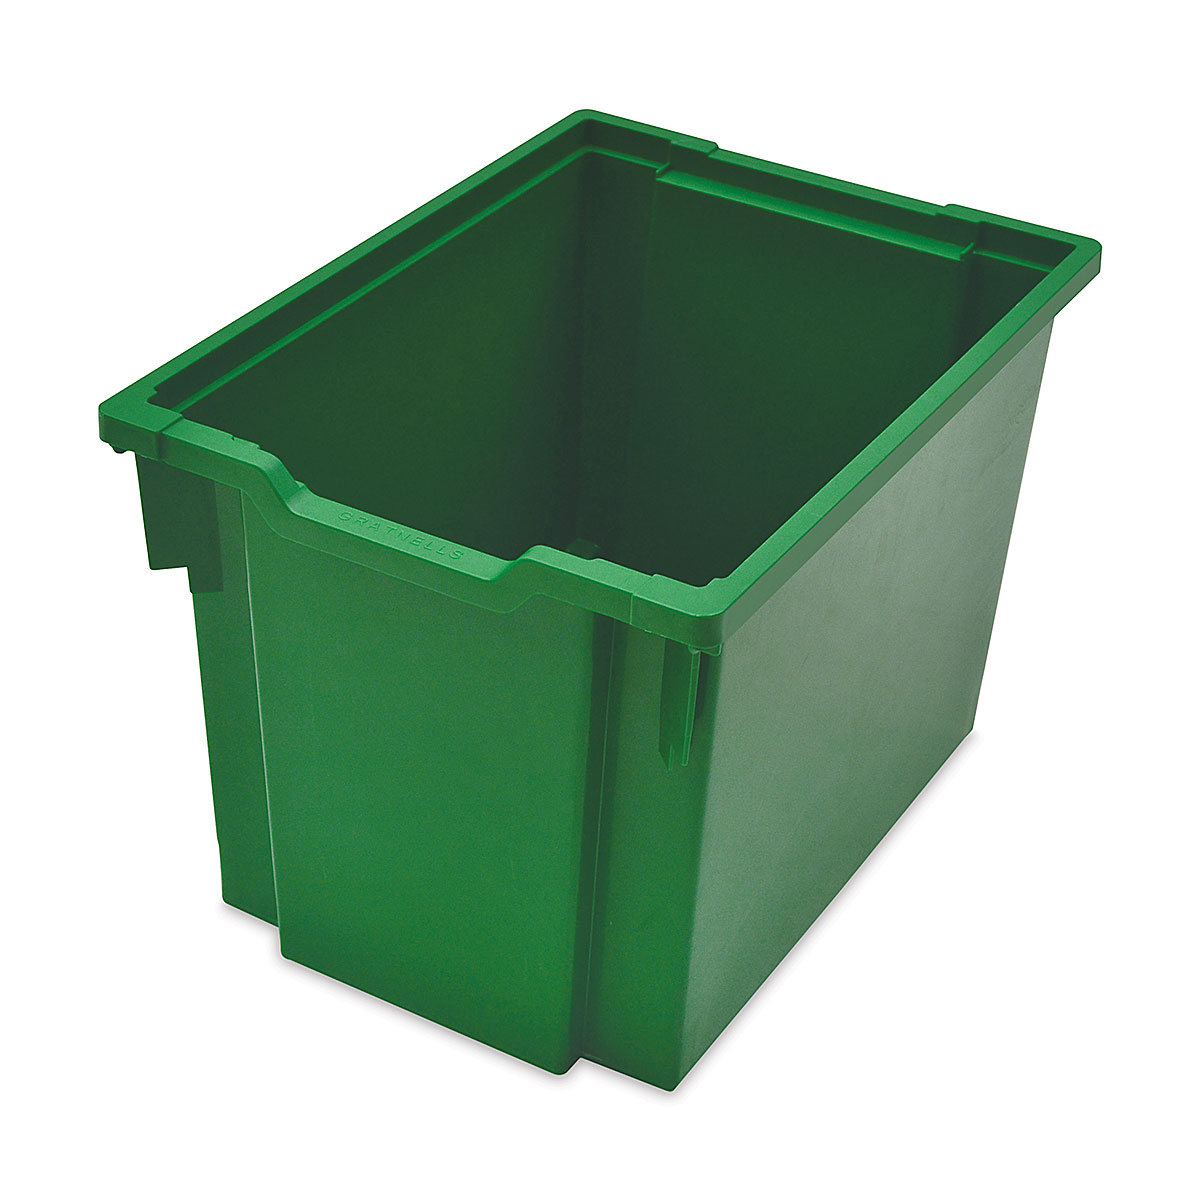 Gratnells Trays and Accessories - Jumbo Trays F3, Pkg of 6, Grass Green